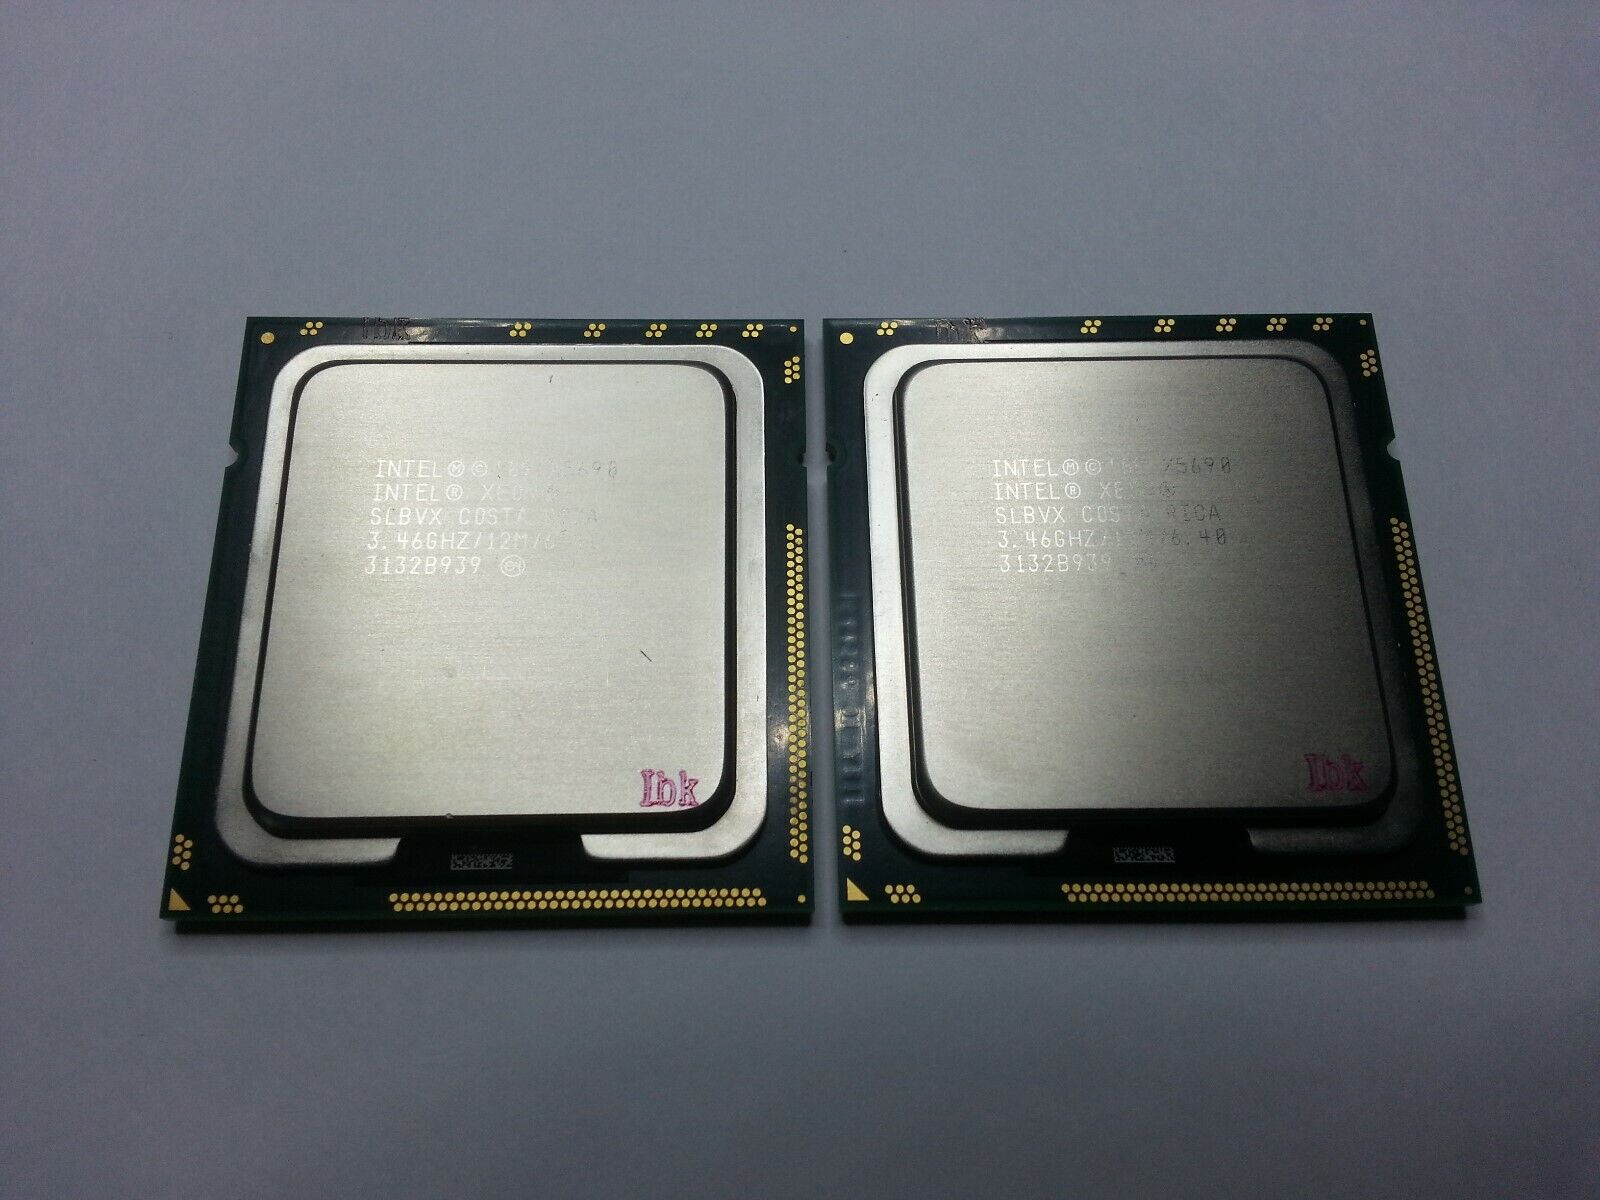 Matched pair of Intel Xeon X5690 3.46GHz Six Core SLBVX Processor w/Grease